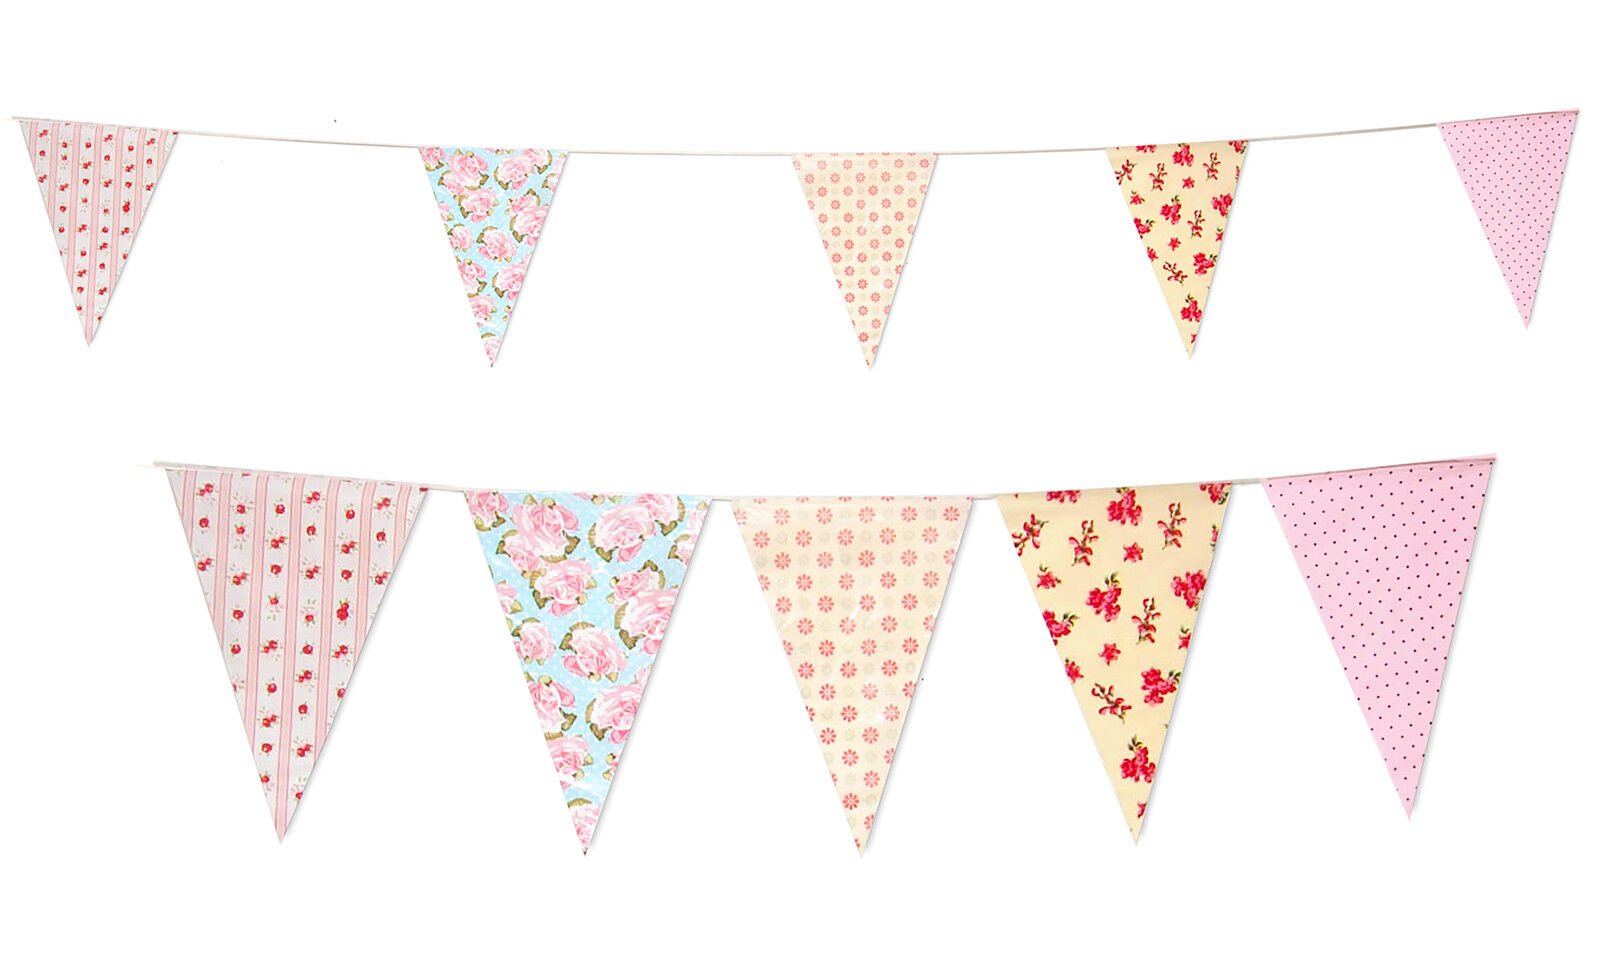 Shabby Chic Bunting 10m Bridal Baby Shower Party Bunting Vintage Print 